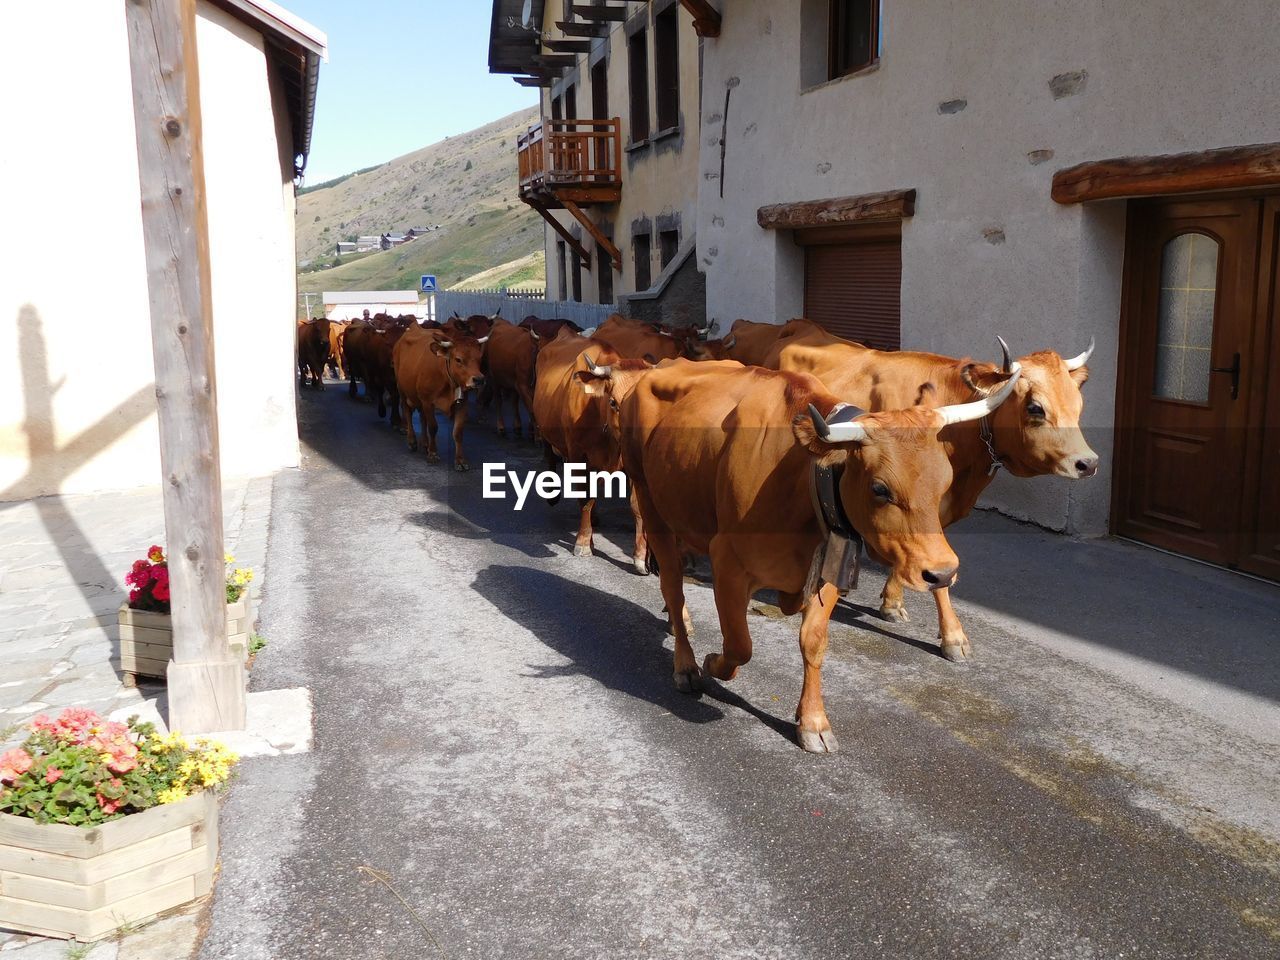 COWS IN FRONT OF BUILT STRUCTURES